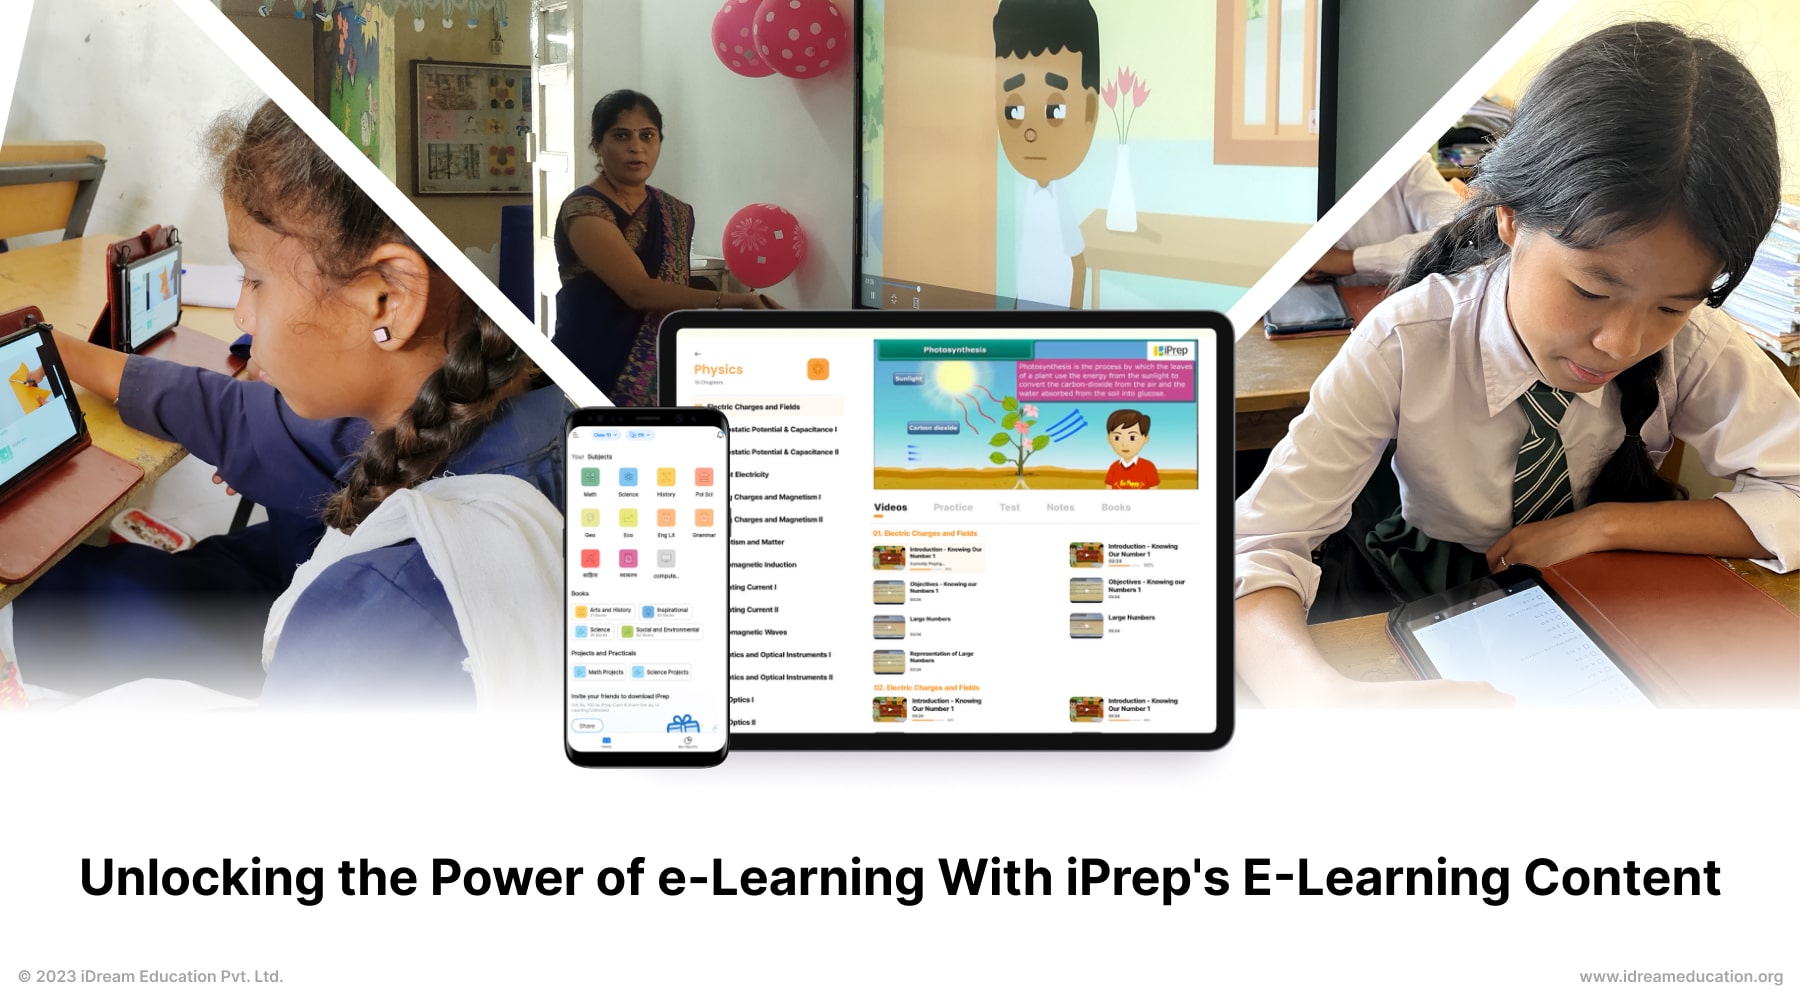 a visual of iPrep's e-learning content and platform unloking the power of e-learning